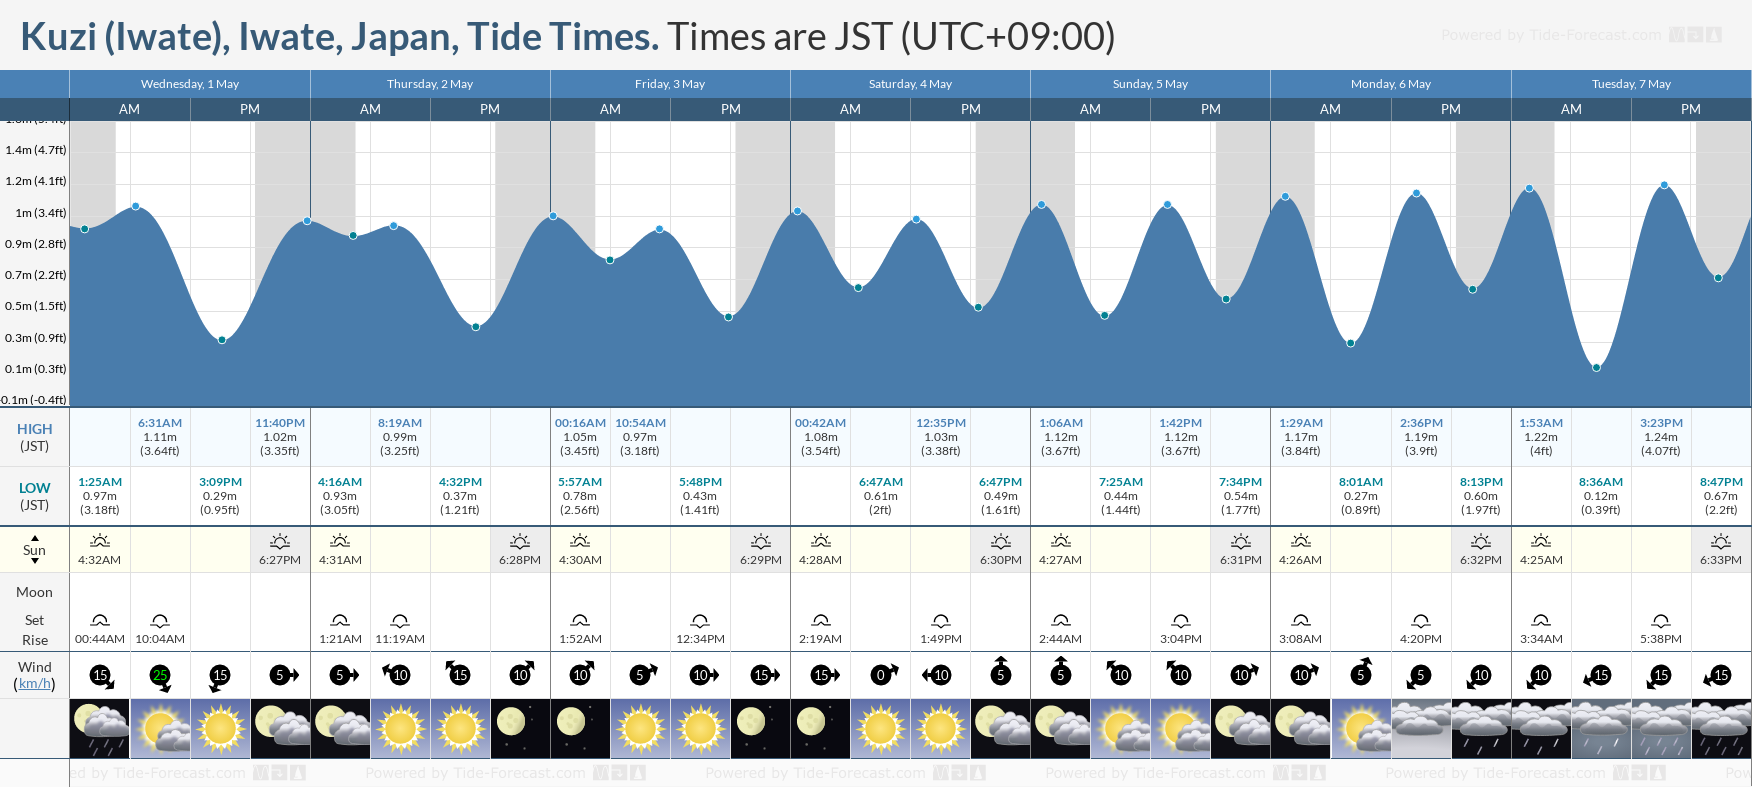 Kuzi (Iwate), Iwate, Japan Tide Chart including high and low tide tide times for the next 7 days